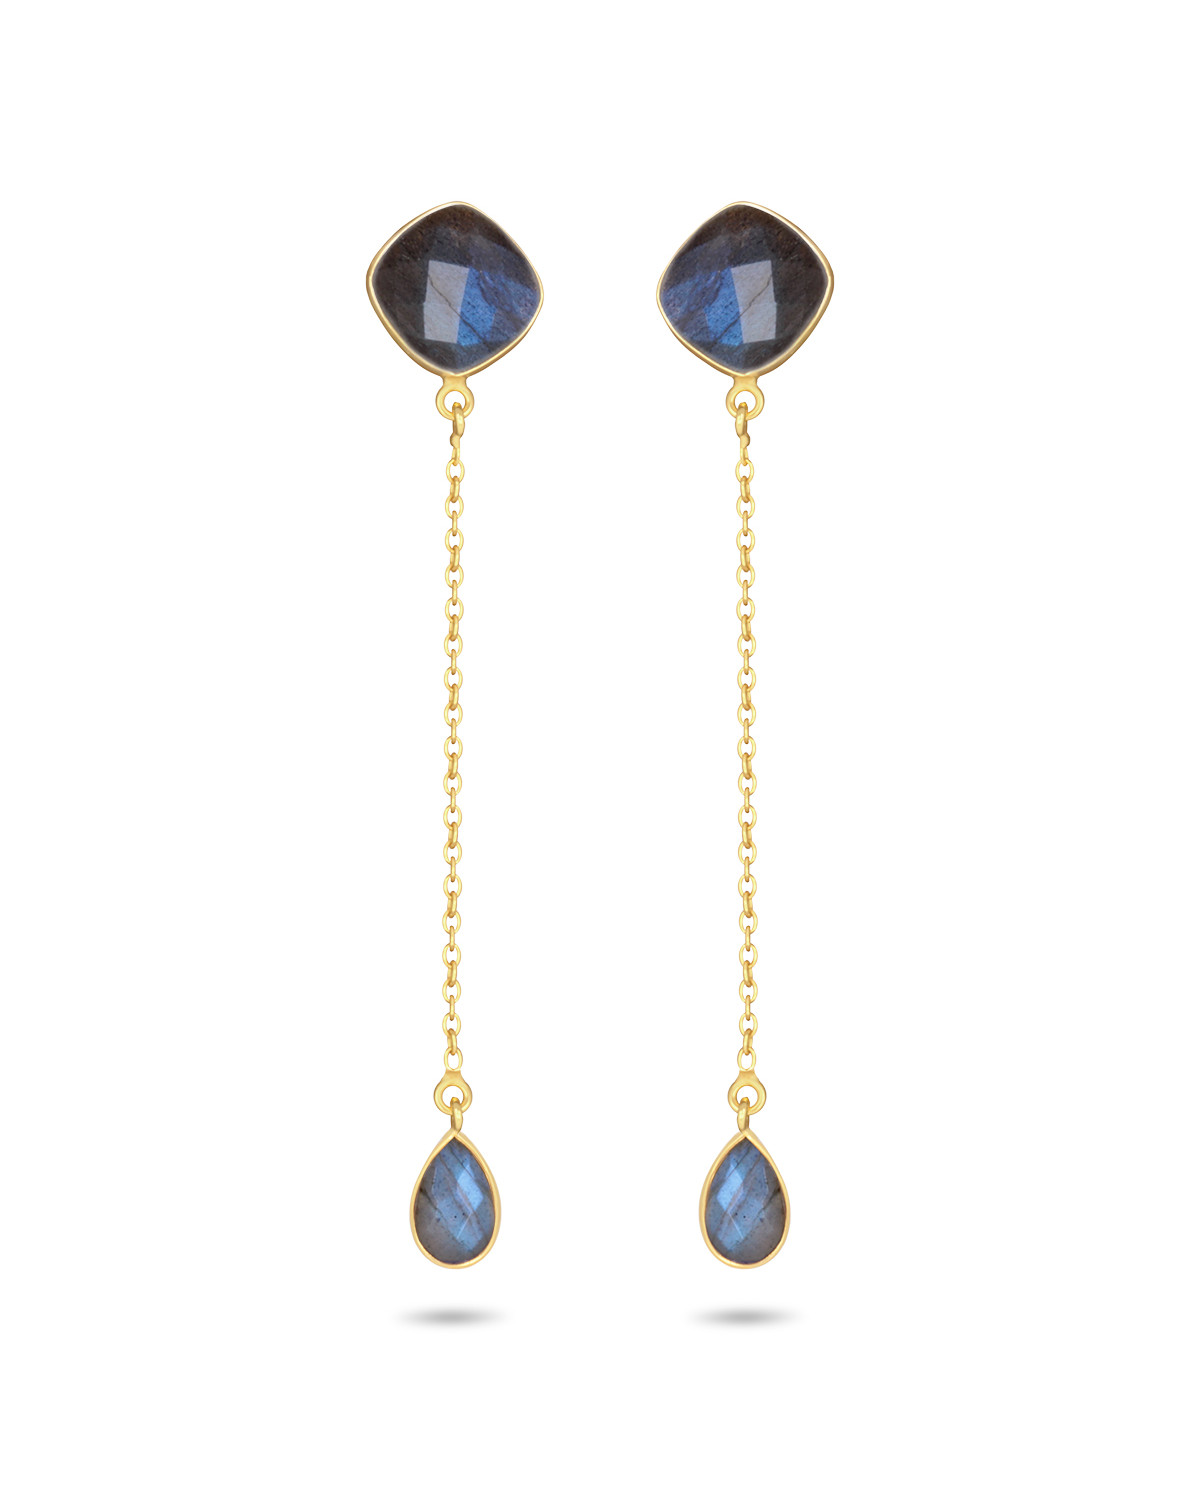 Faceted Labradorite earrings in 925-000 silver with gold plating